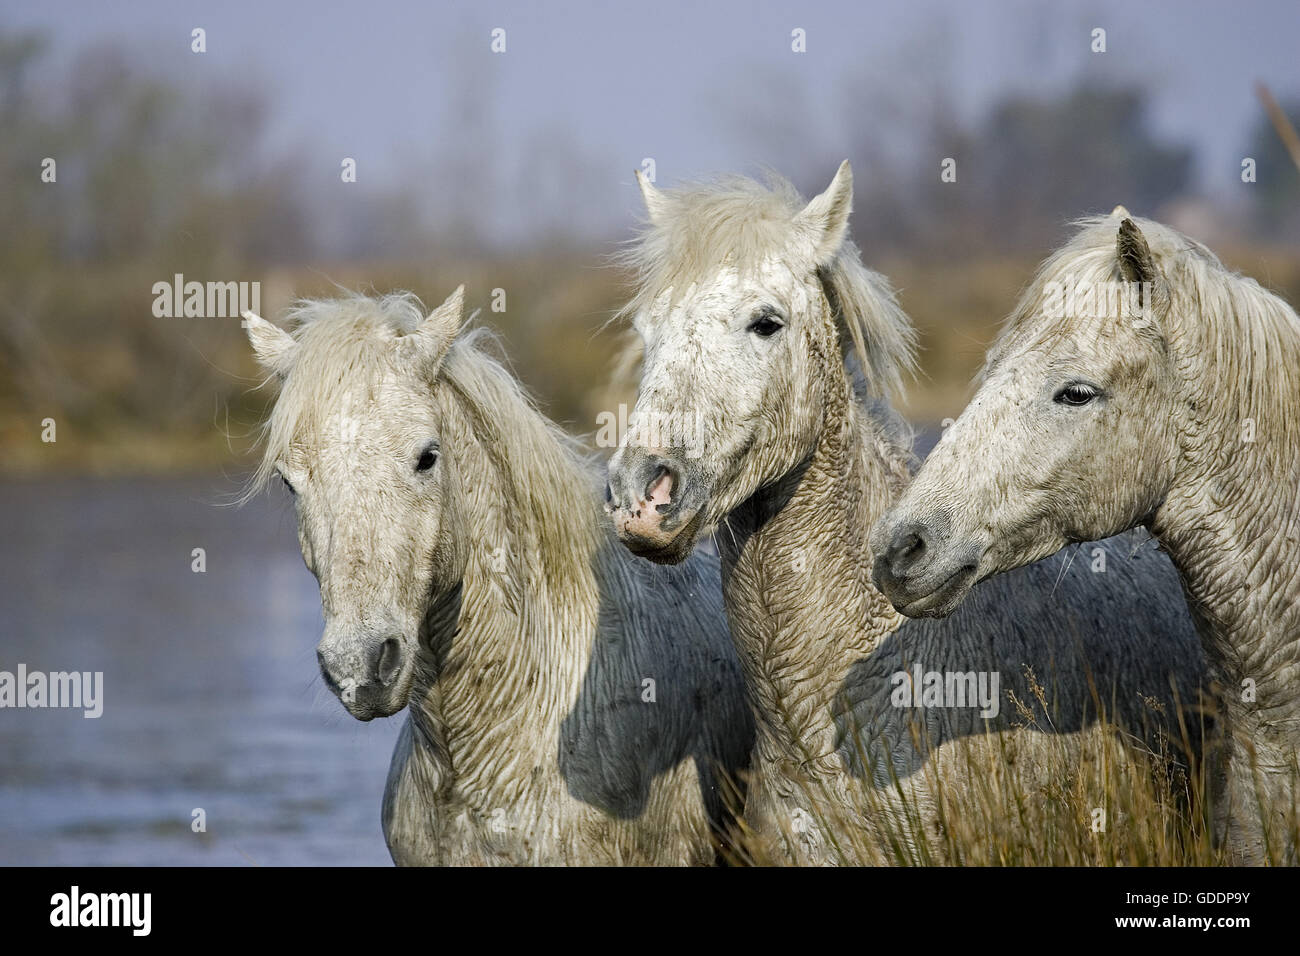 Camargue Horse, Saintes Maries de la Mer in the South East of France Stock Photo